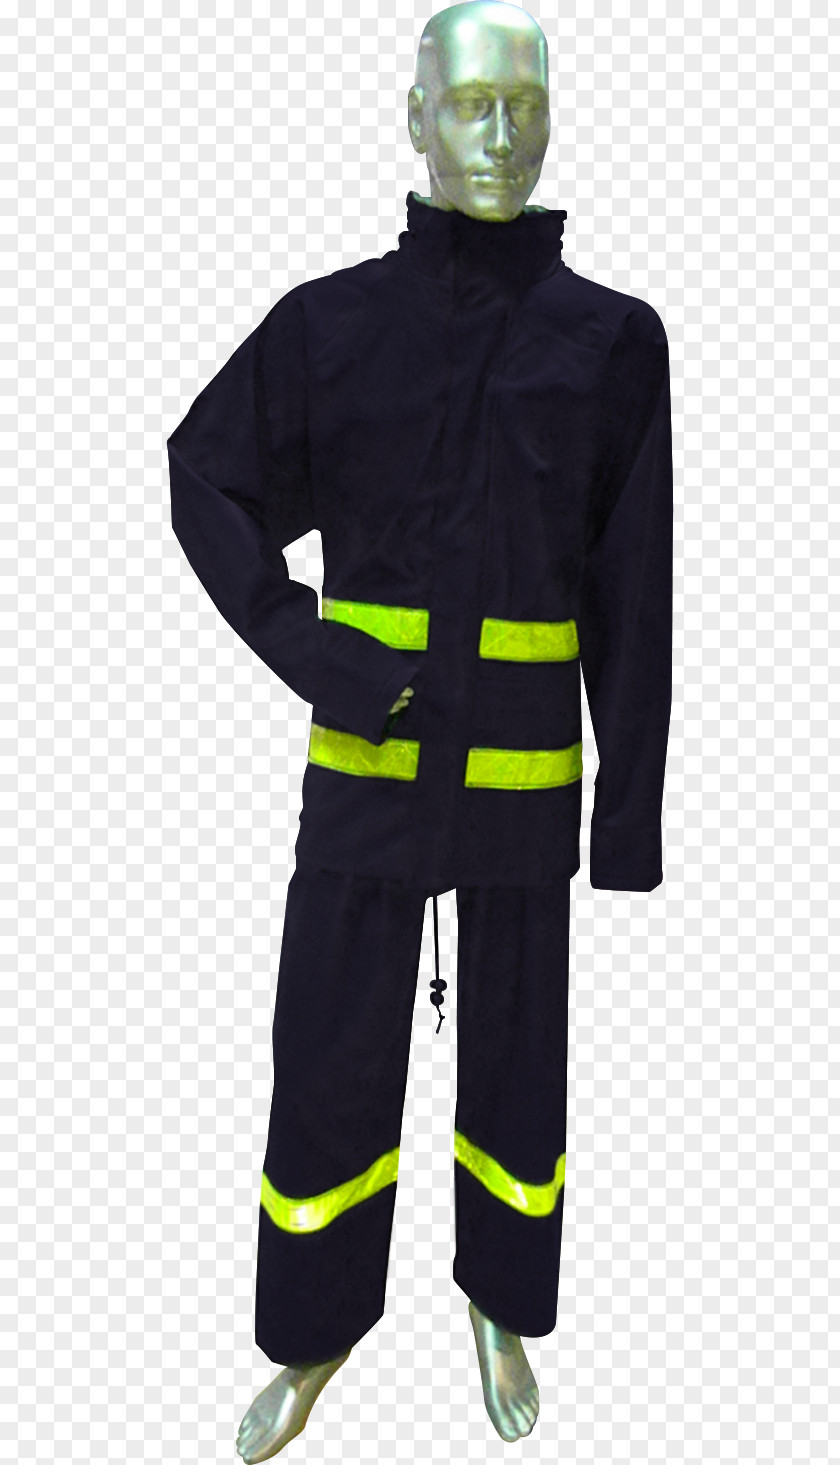 Platinum Personal Protective Equipment Outerwear Industry Gaiters Jacket PNG